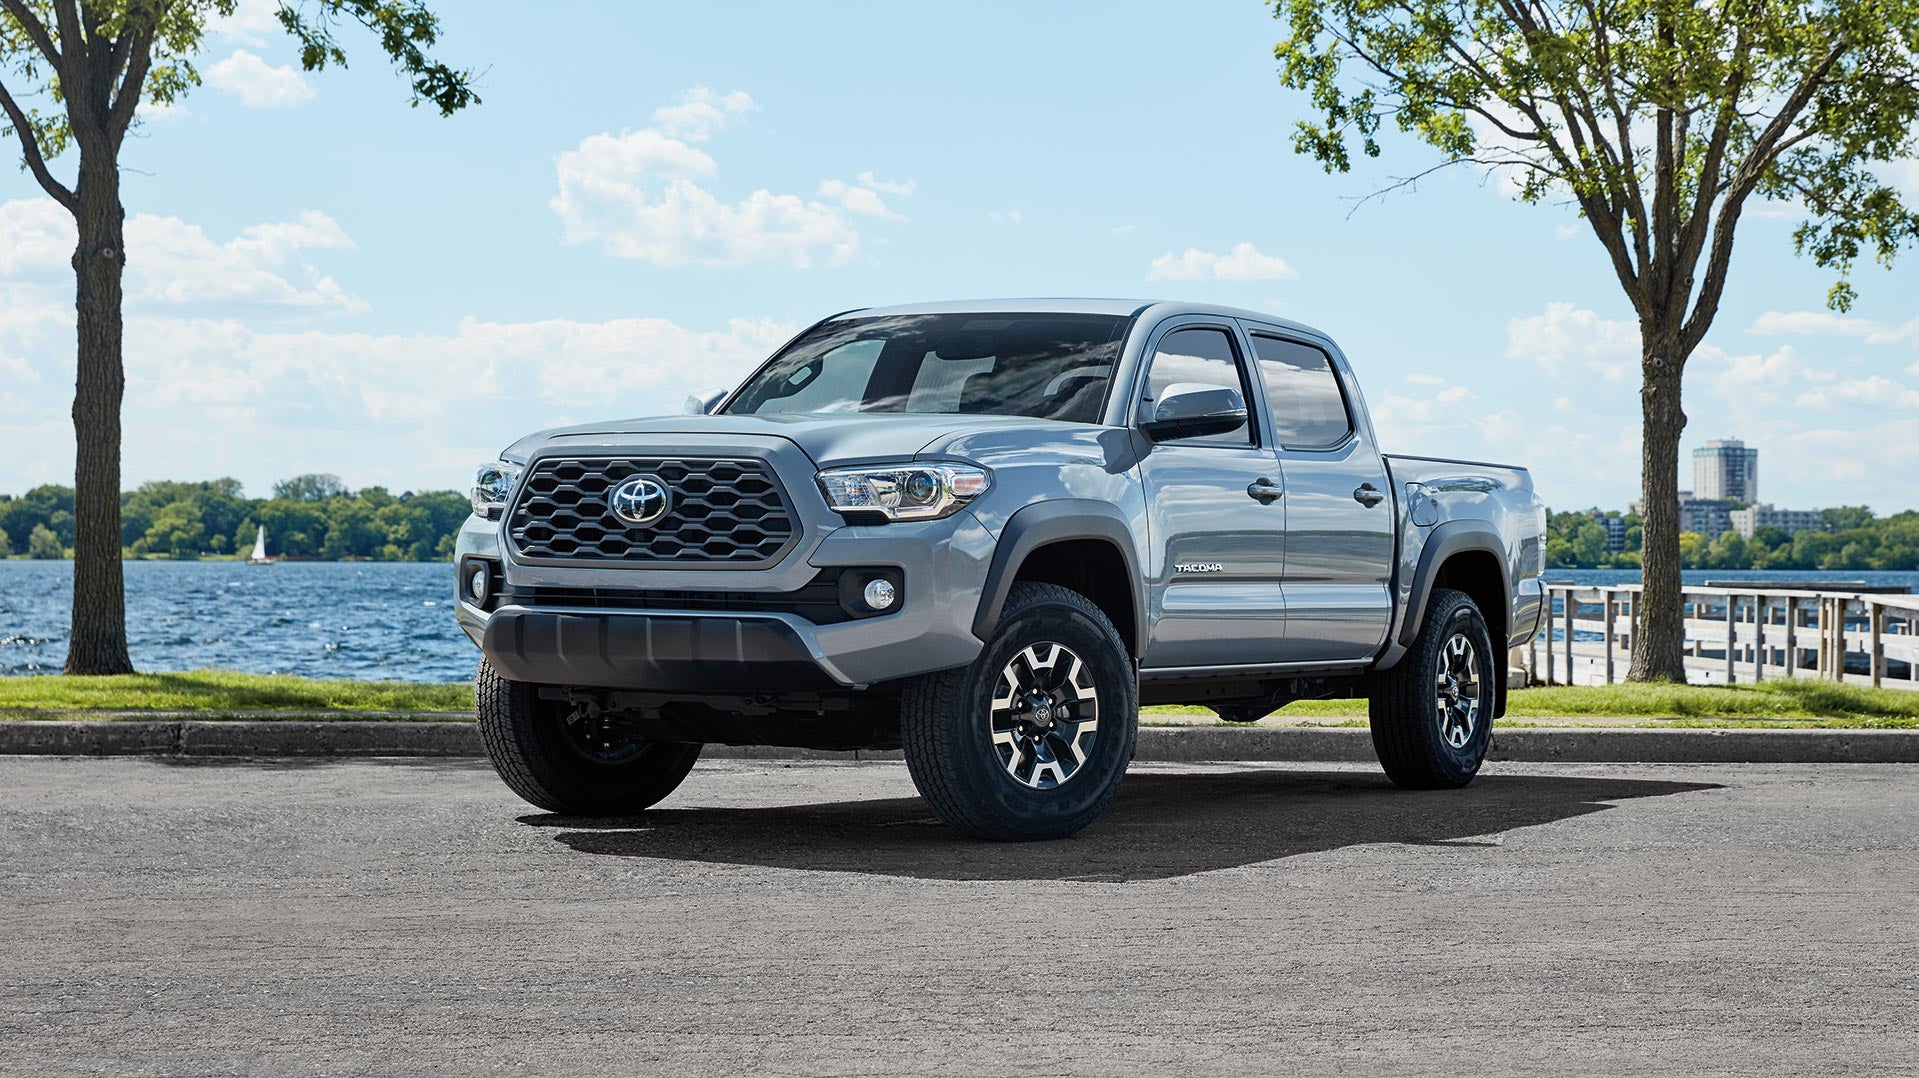 how to buy or lease a new Toyota at Fiore Toyota of Hollidaysburg | Grey MY20 Tacoma Parked Water